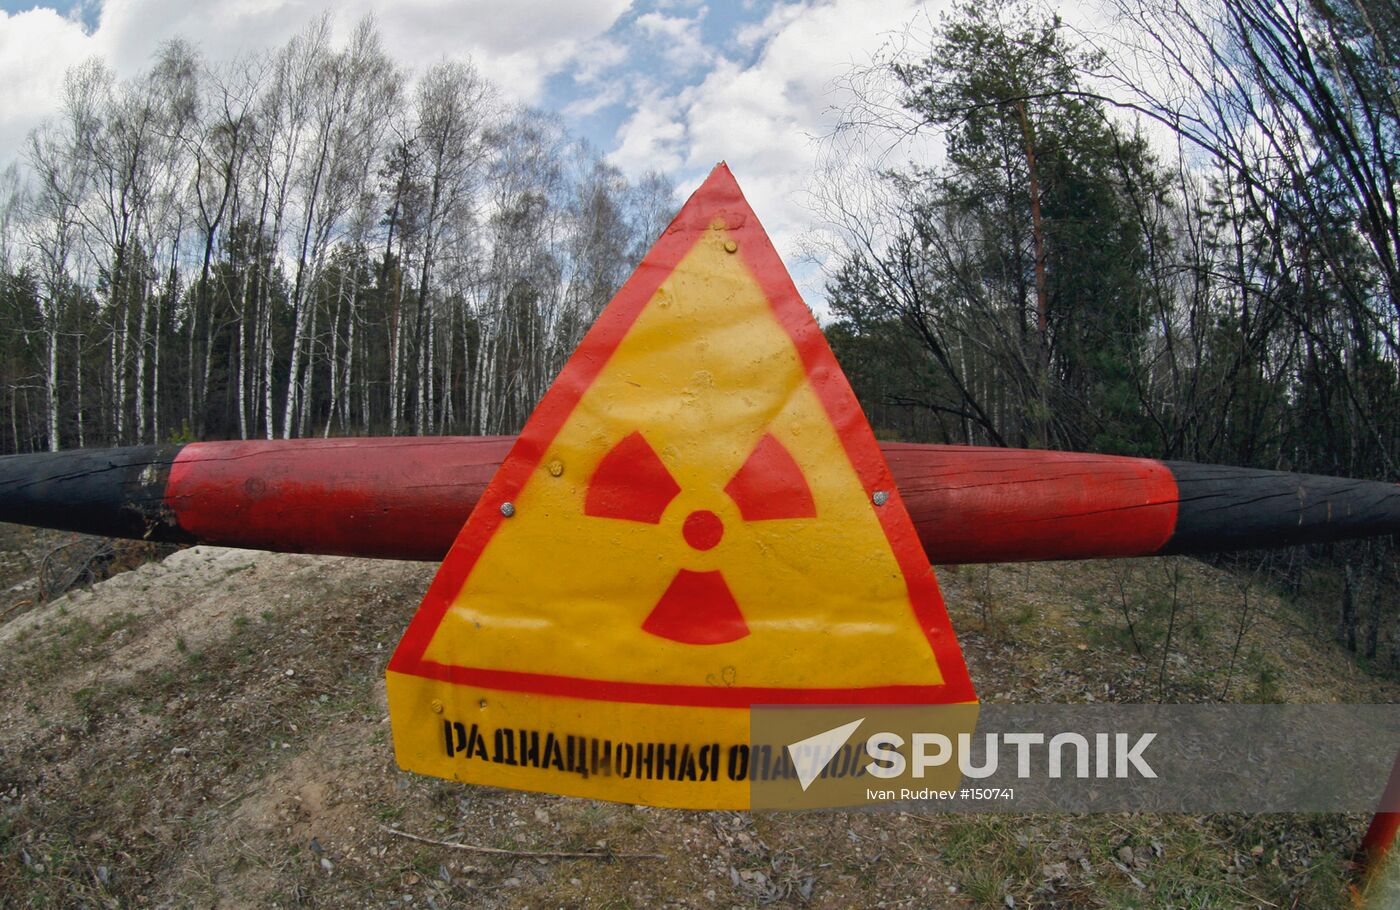 CHERNOBYL NUCLEAR PLANT RESTRICTED ZONE